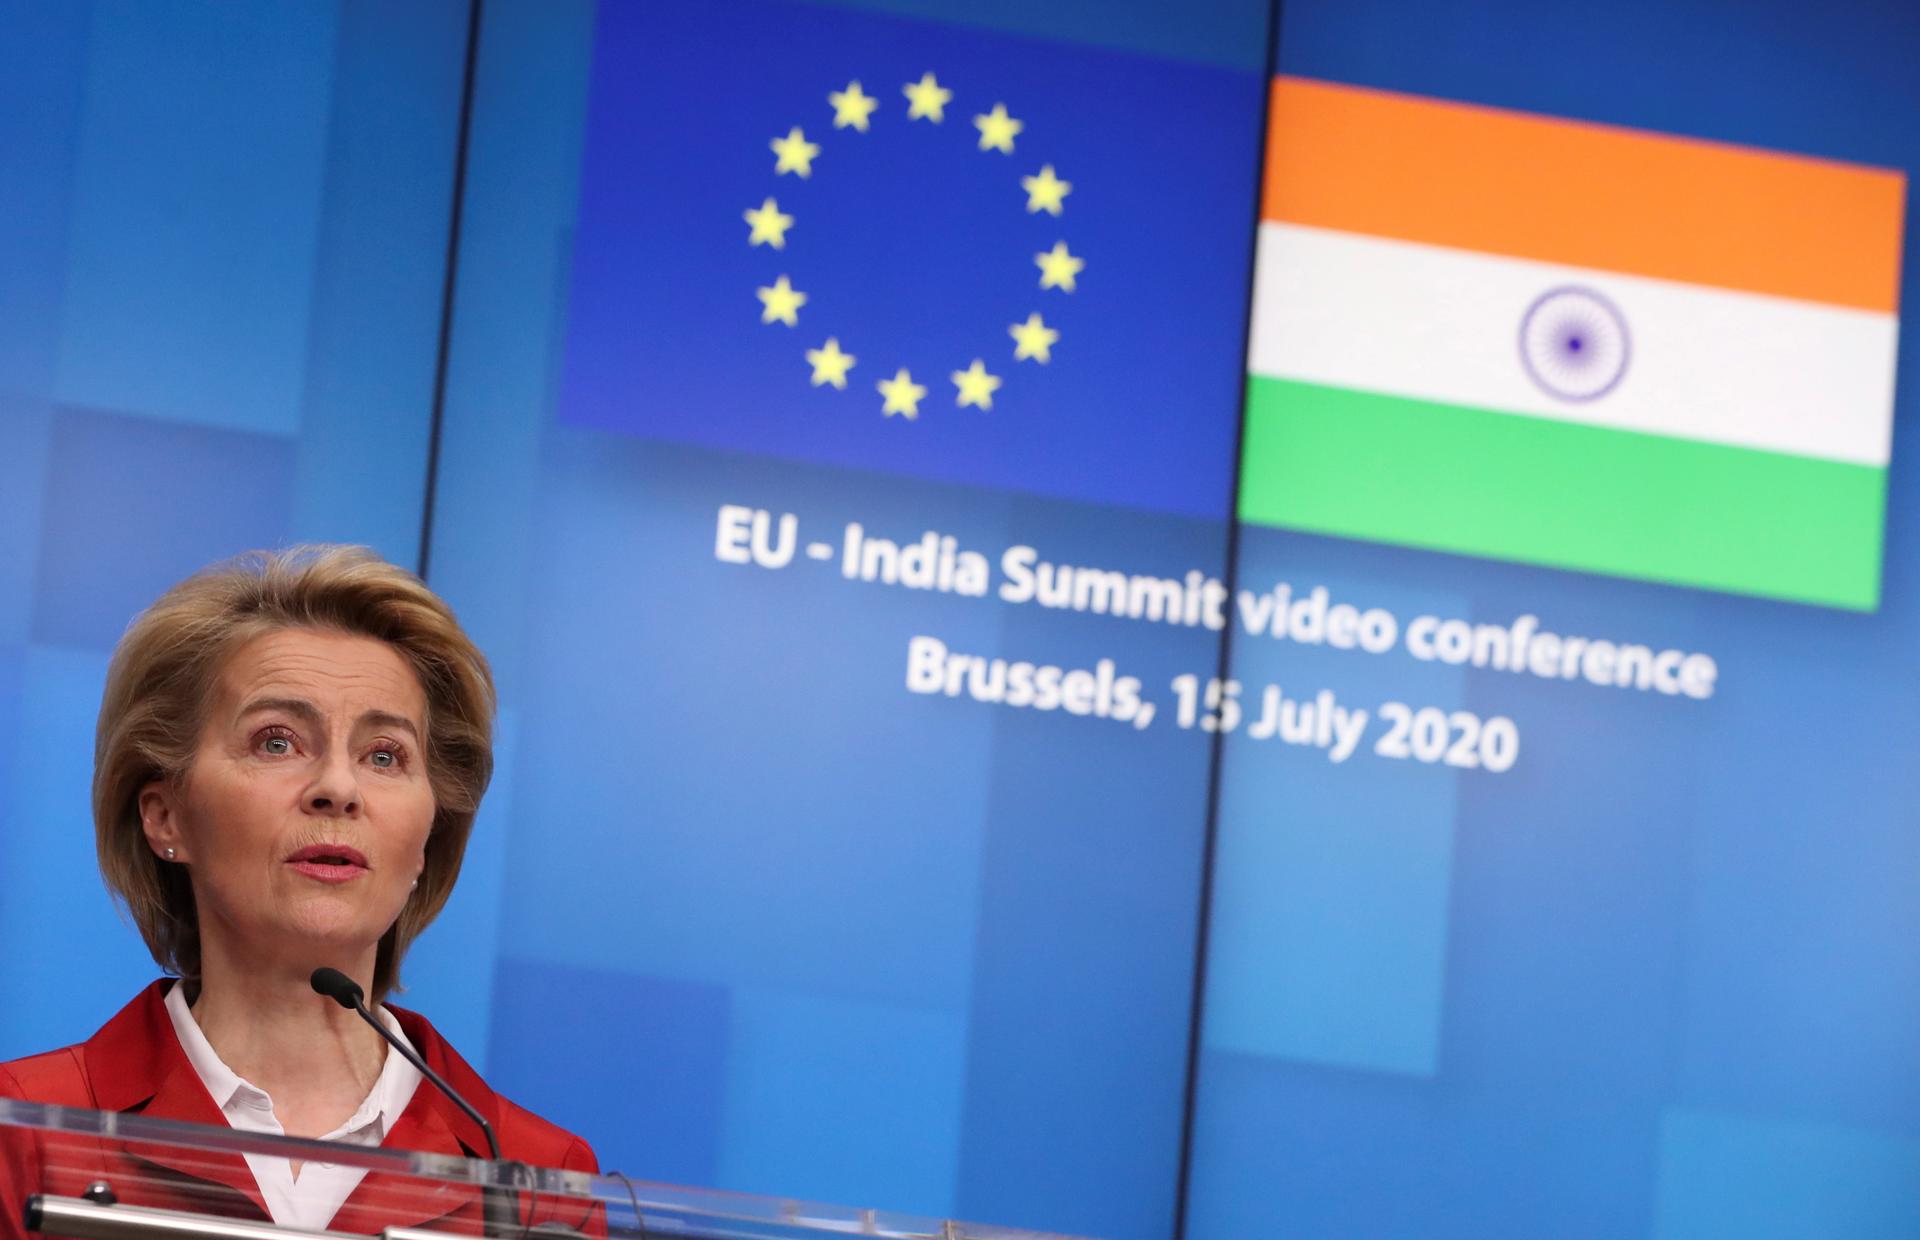 (FILE) European Commission President Ursula von der Leyen holds a news conference after a virtual summit with Indian Prime Minister Narendra Modi in Brussels, Belgium, 15 July 2020. EFE/EPA/YVES HERMAN / POOL